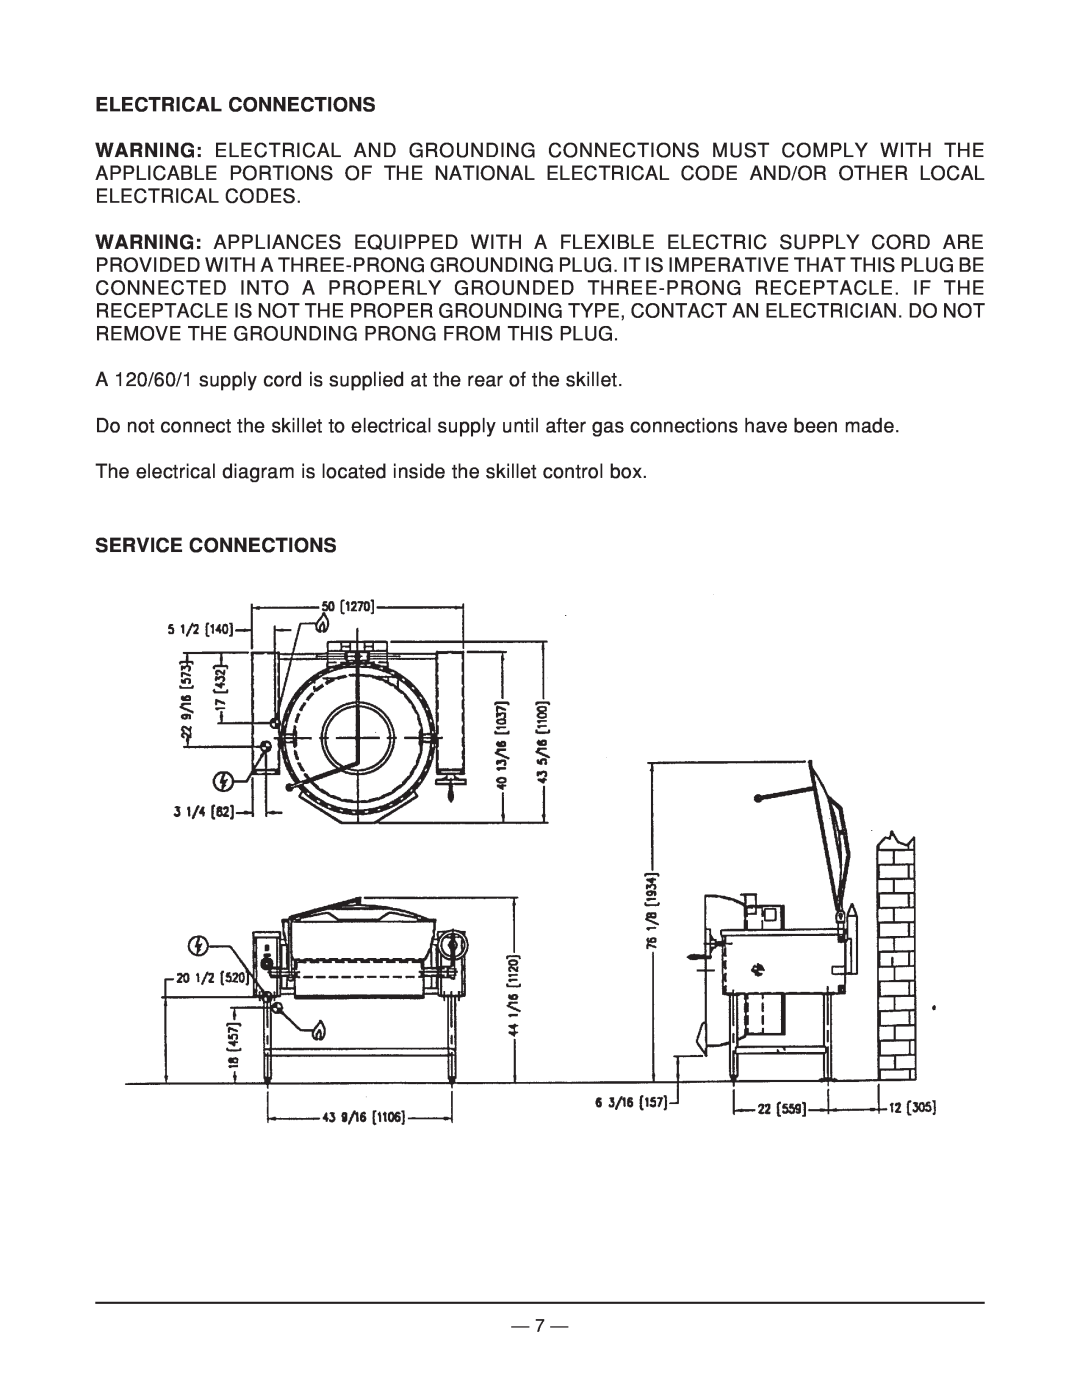 Vulcan-Hart ML-114950, VGTRS35 operation manual Electrical Connections, Service Connections 